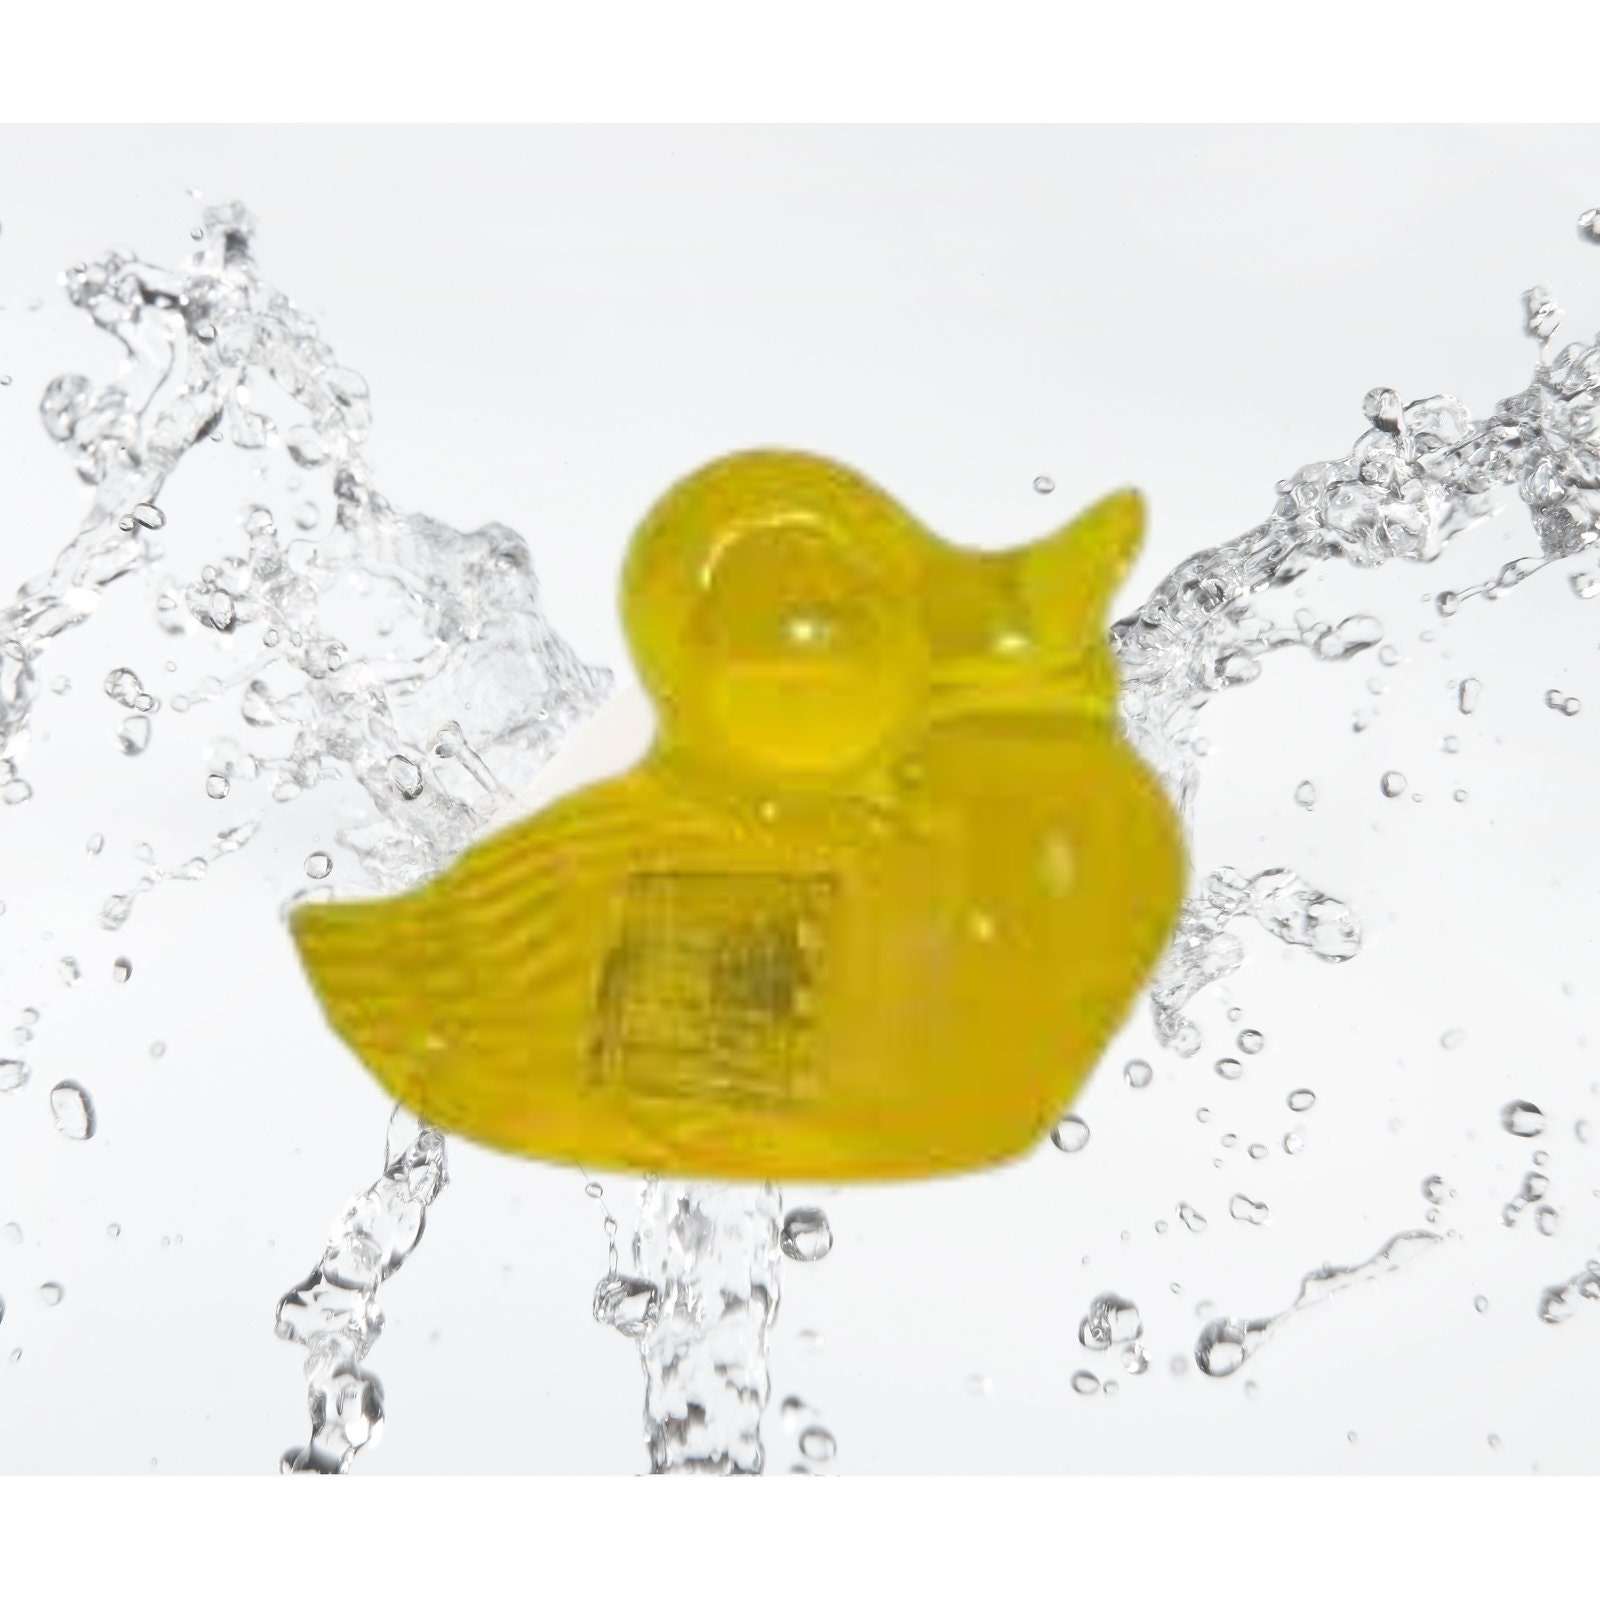 The Smiling Duck Real Cash Money Soap - Yellow Duckie Soap with Real Cash - for Bath - Each Bar Contains A Real US Bill - Up to - As Seen on Tik